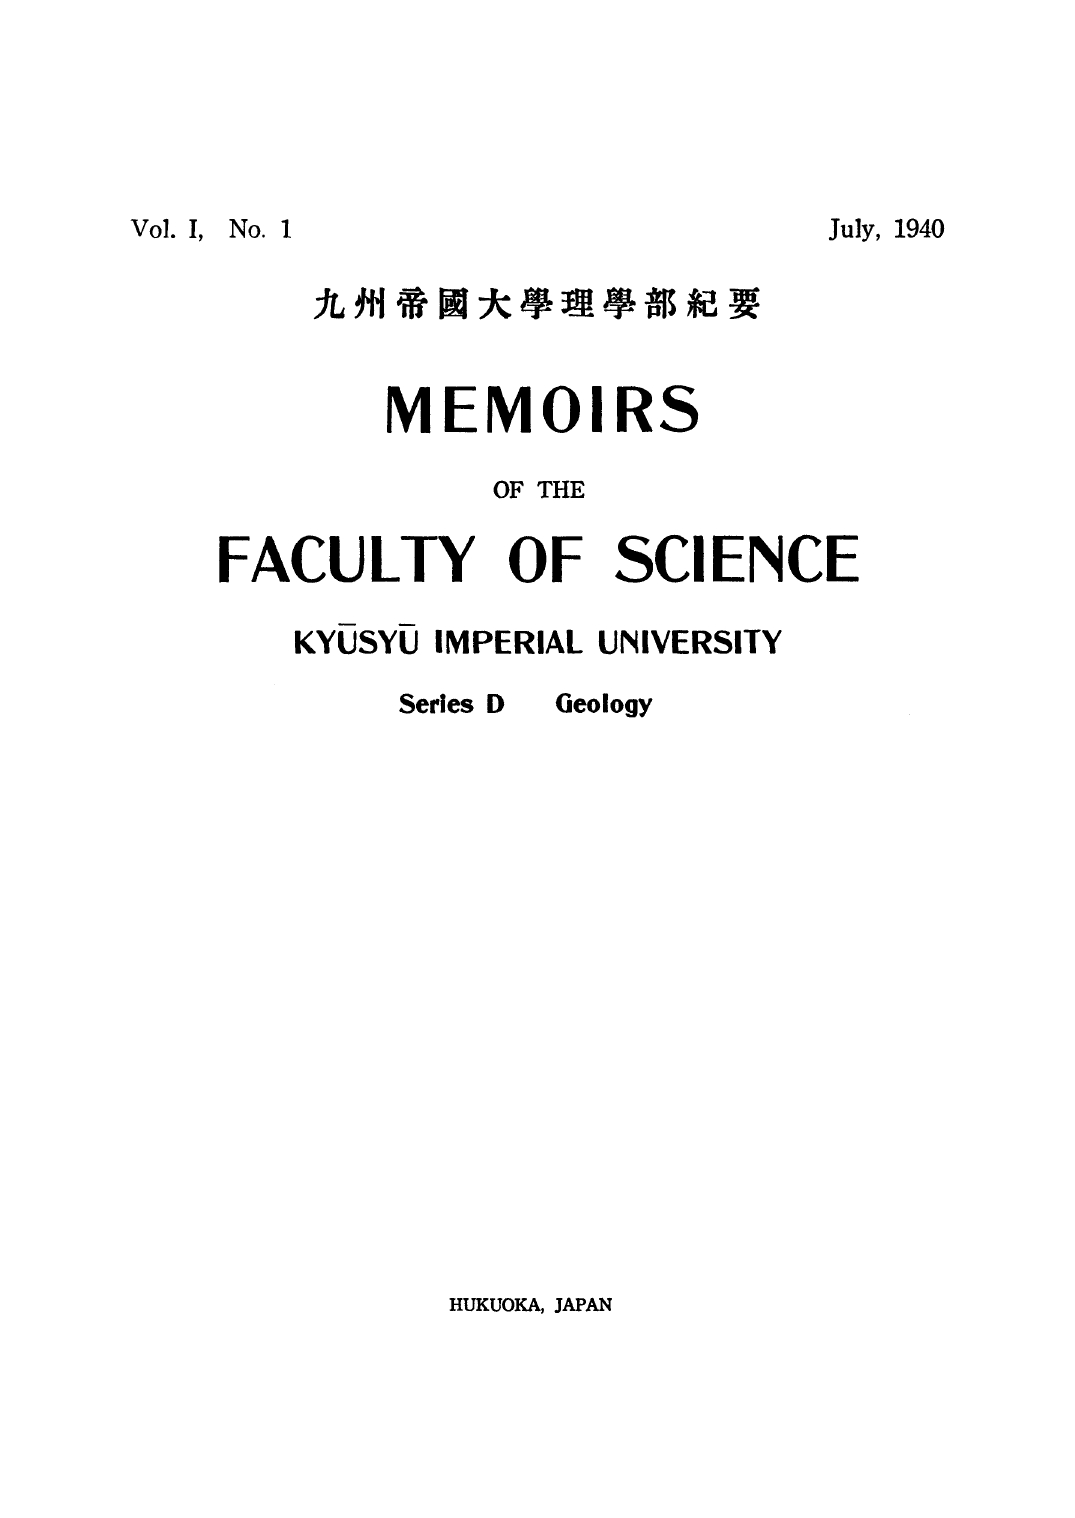 『Memoirs of the Faculty of Science, Kyūsyū Imperial University. Series D, Geology』創刊号表紙